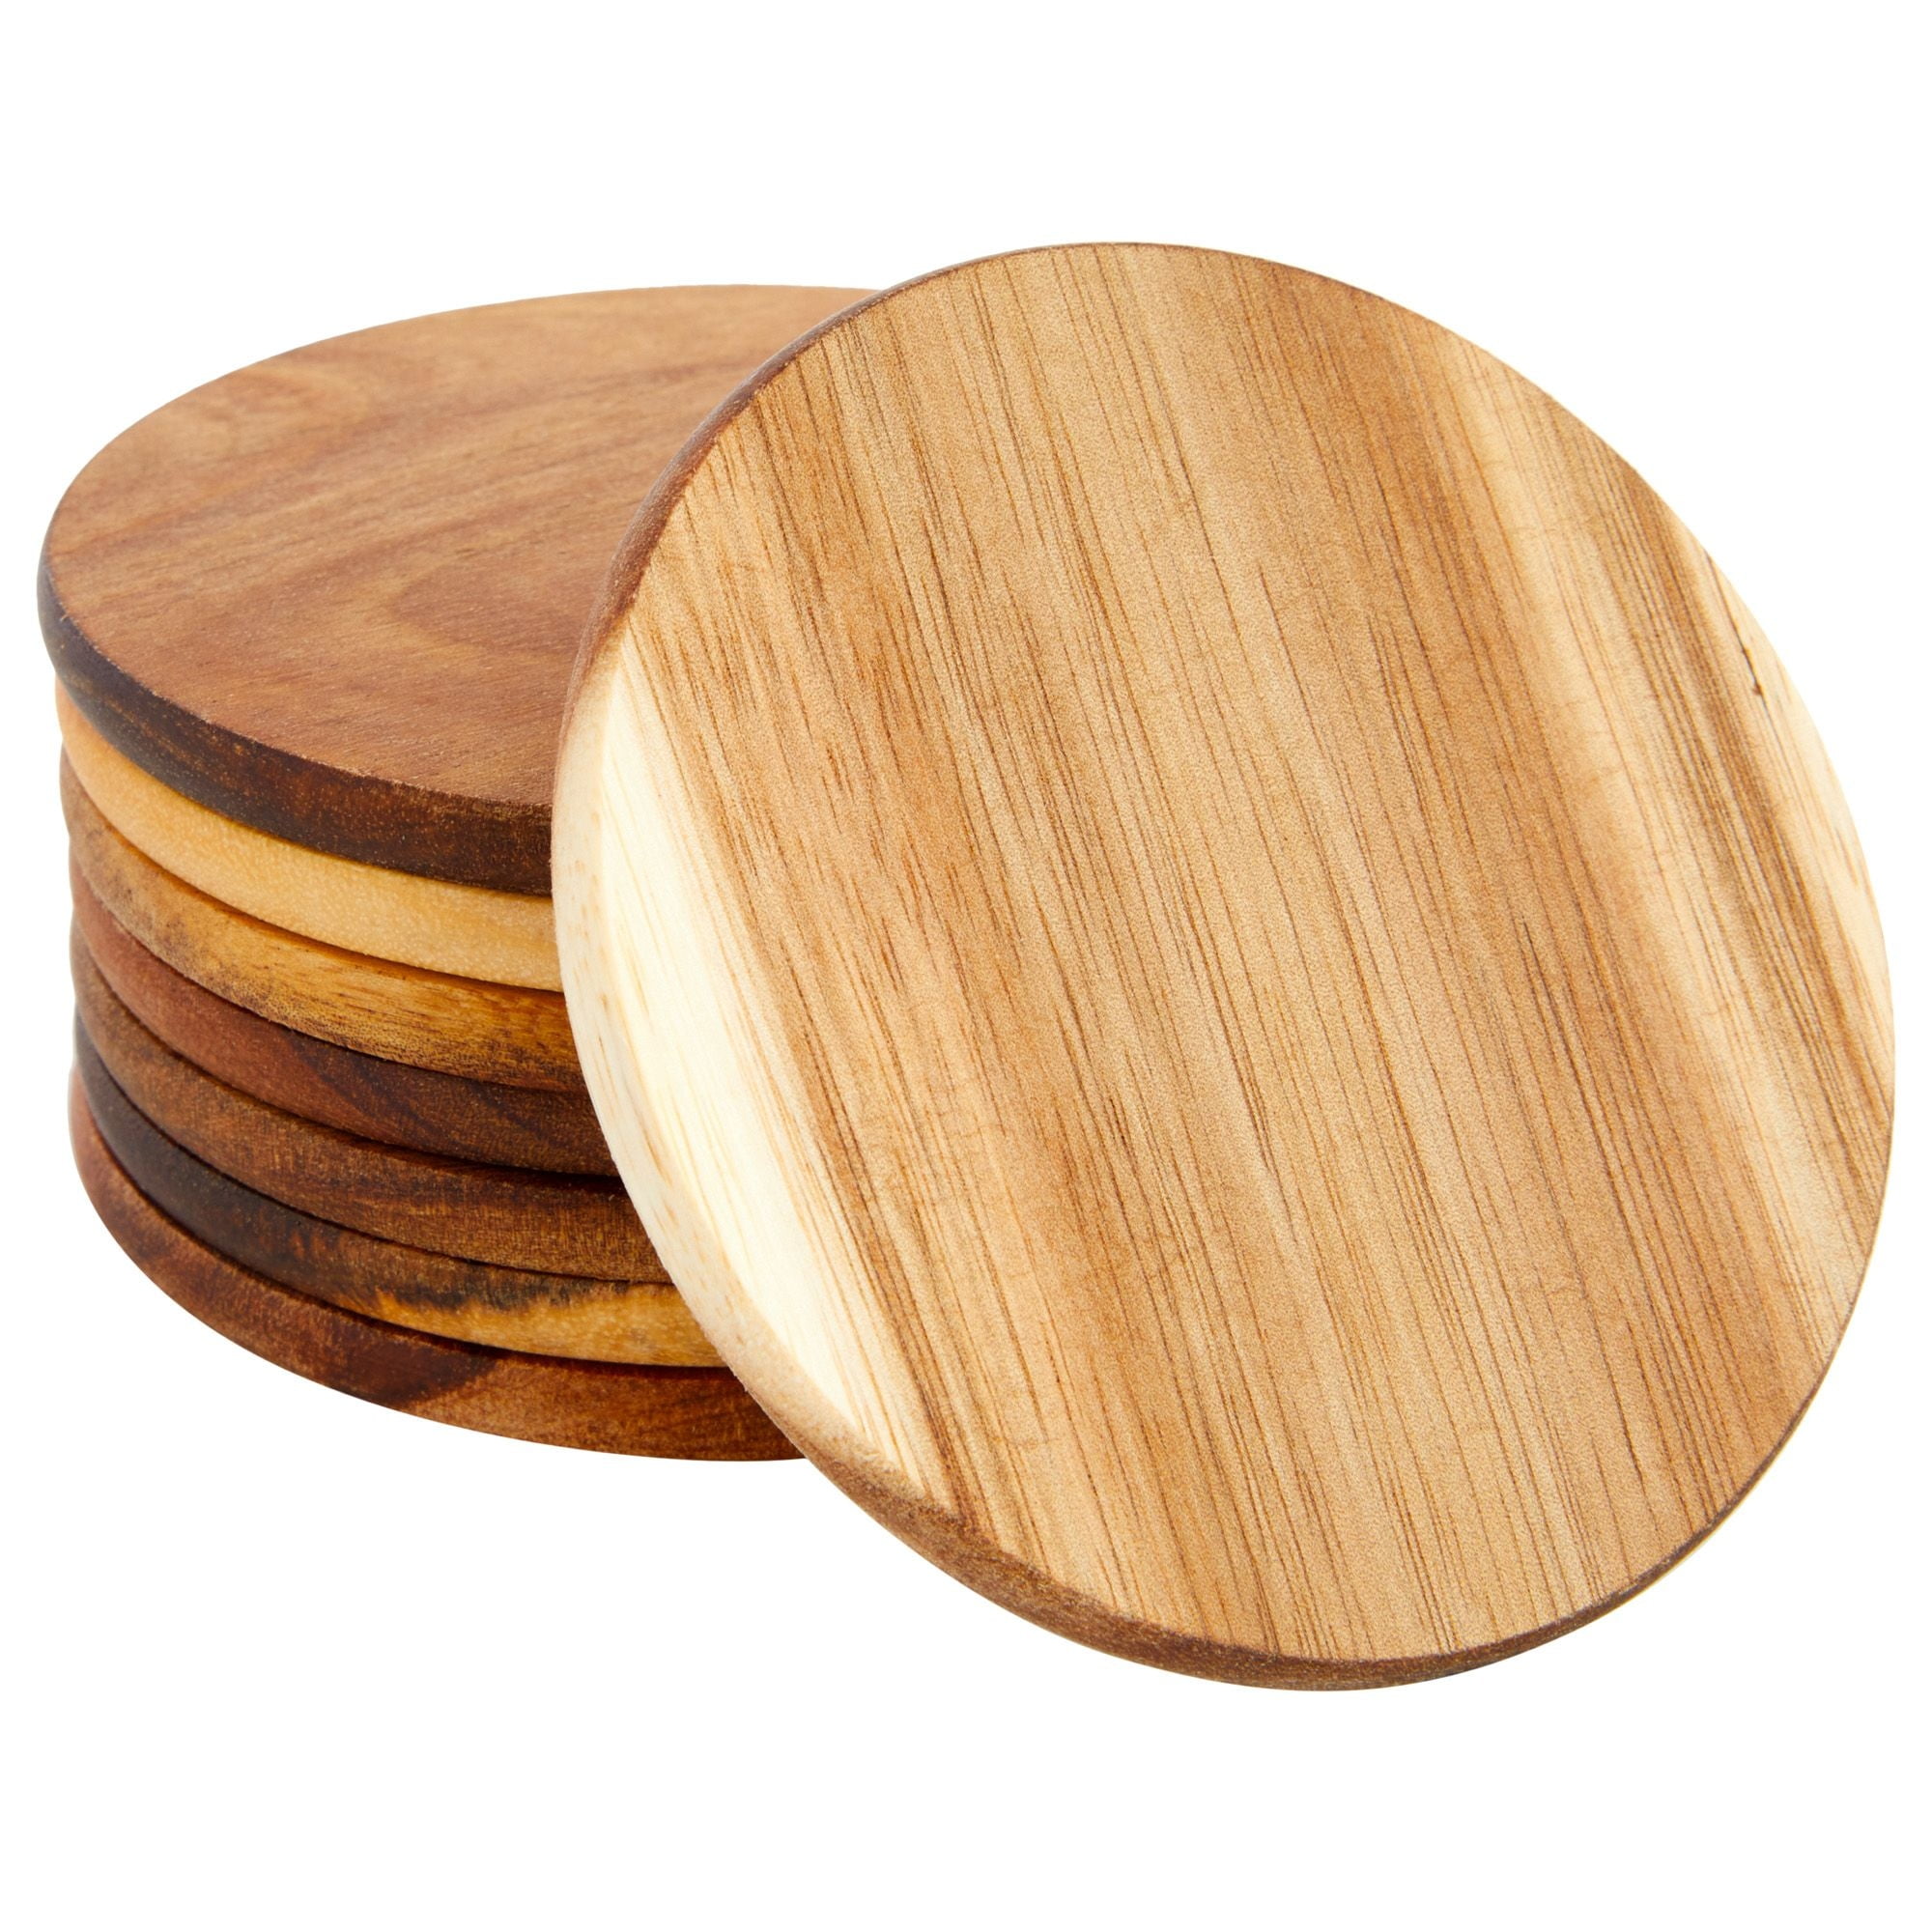 Wooden Coasters for Drinks - Natural Acacia Wood Drink Coaster Set for  Drinking Glasses, Tabletop Protection for Any Table Type 1pc 